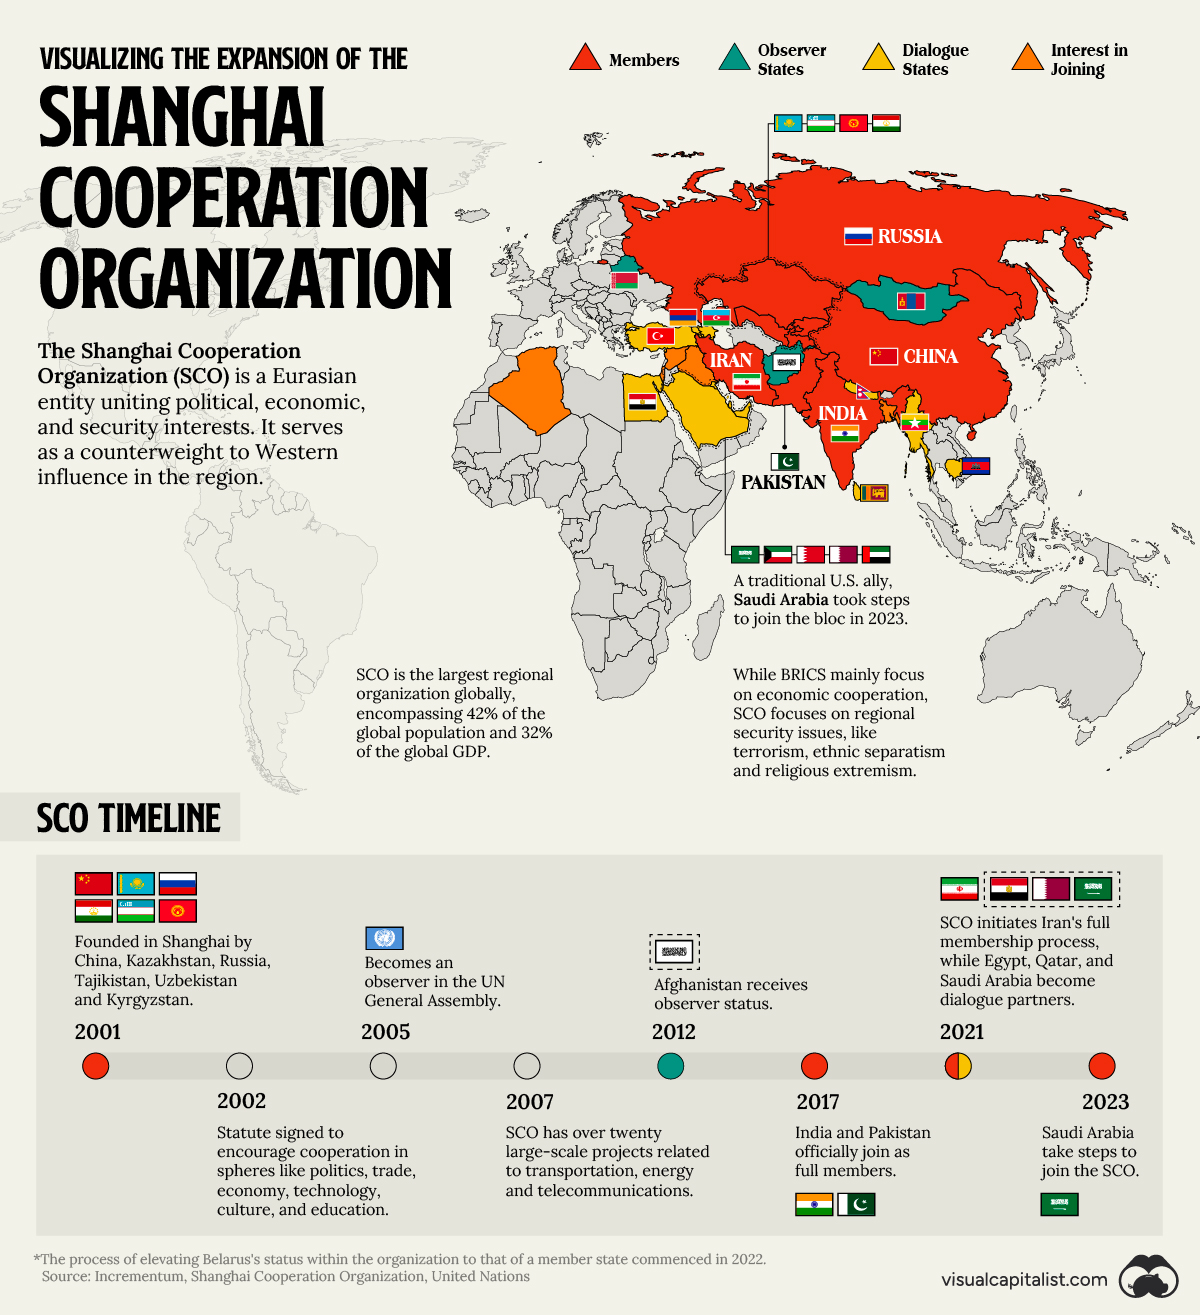 Visualizing the Expansion of the Shanghai Cooperation Organization